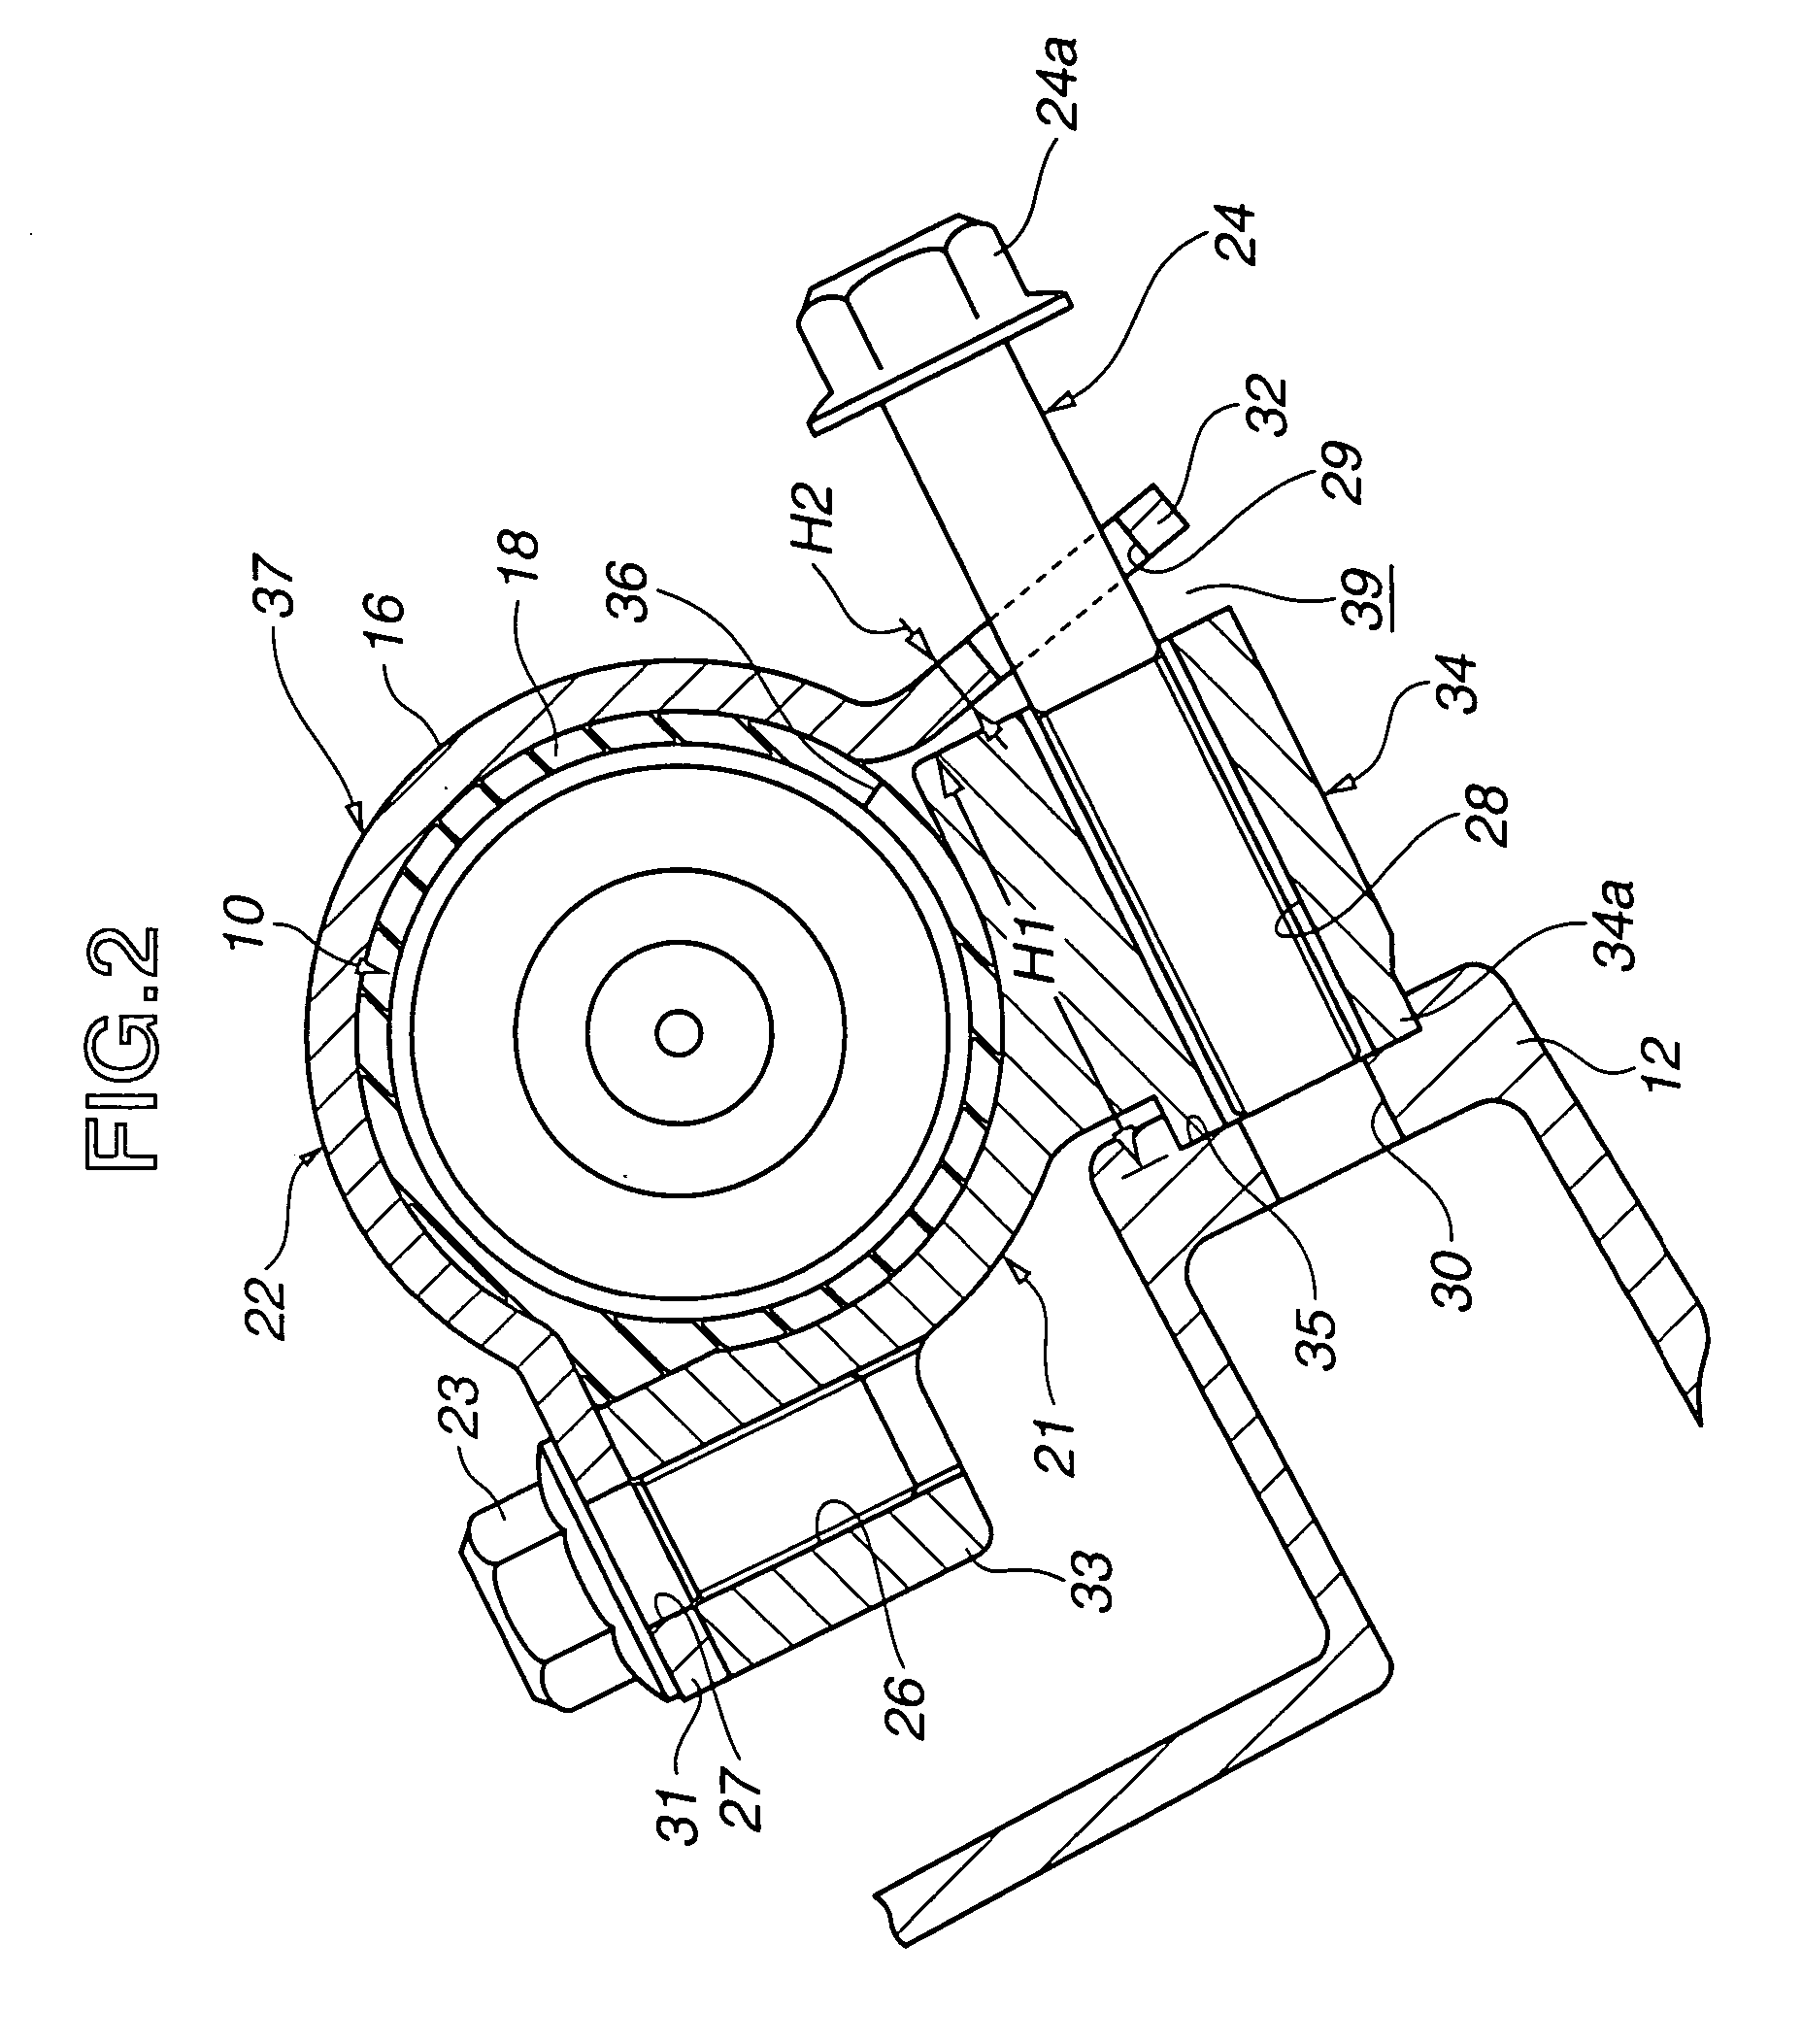 Structure for fixing steering-gear housing